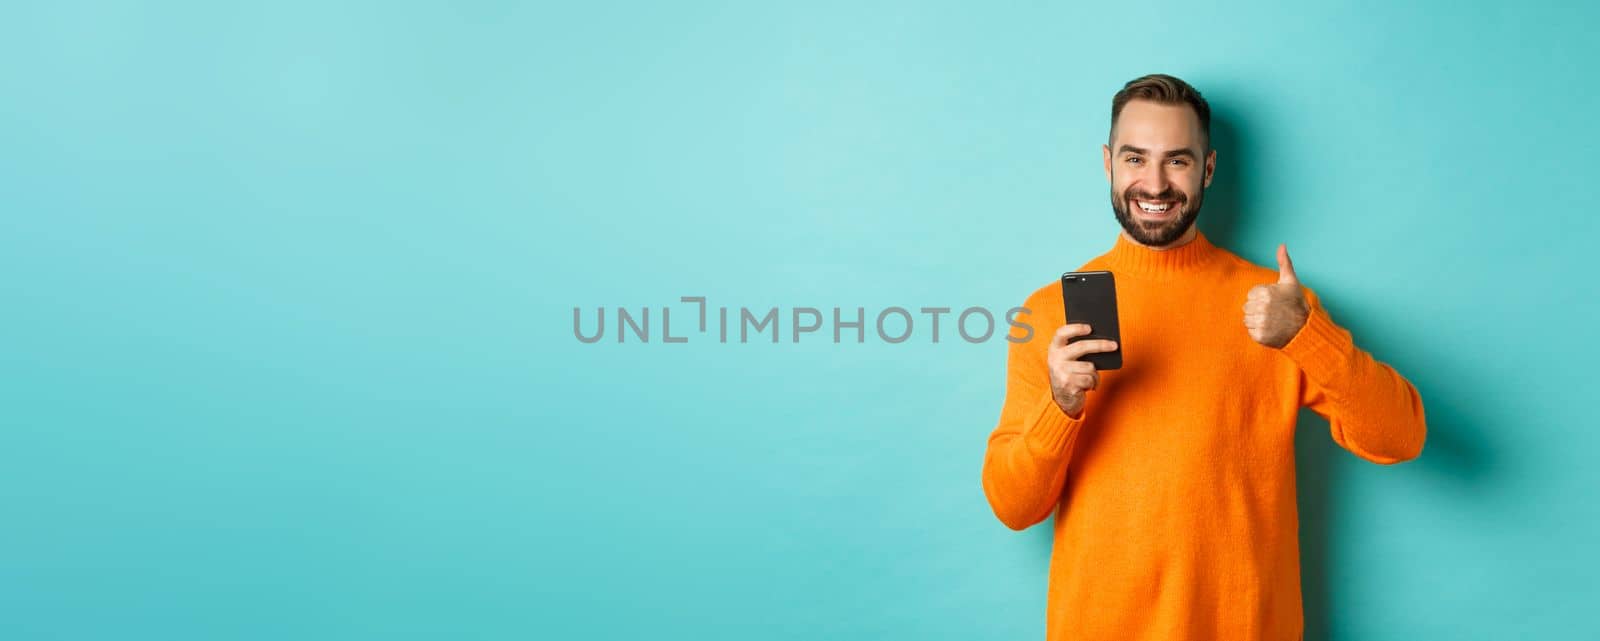 Photo of satisfied young man in orange sweater, showing thumb-up after reading on mobile phone, standing pleased against turquoise background.